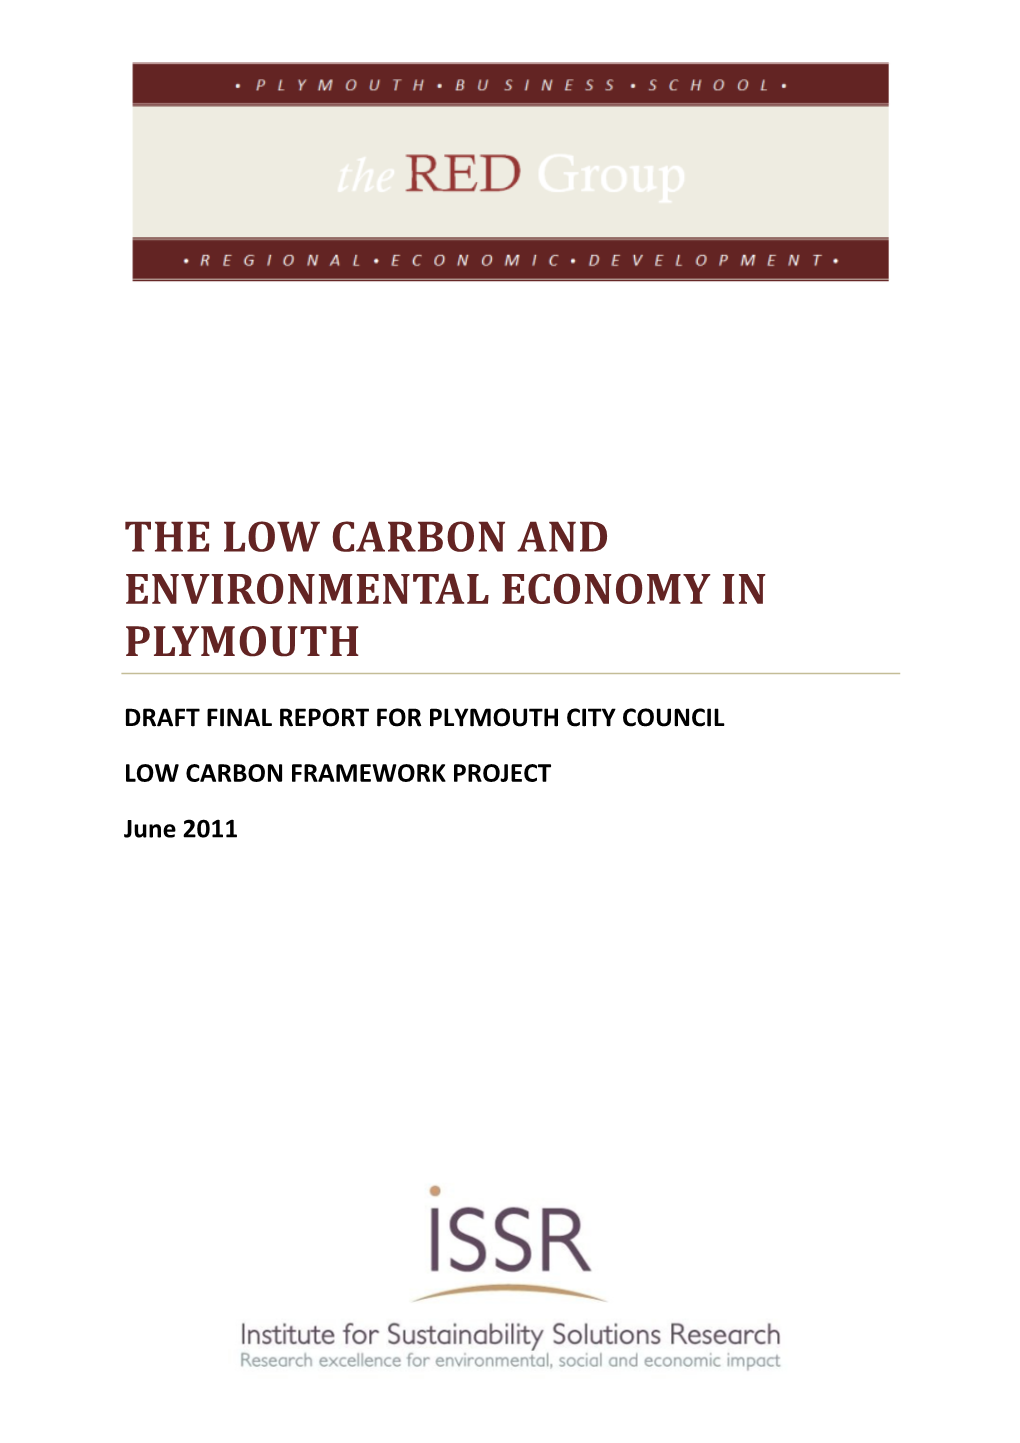 The Low Carbon and Environmental Economy in Plymouth